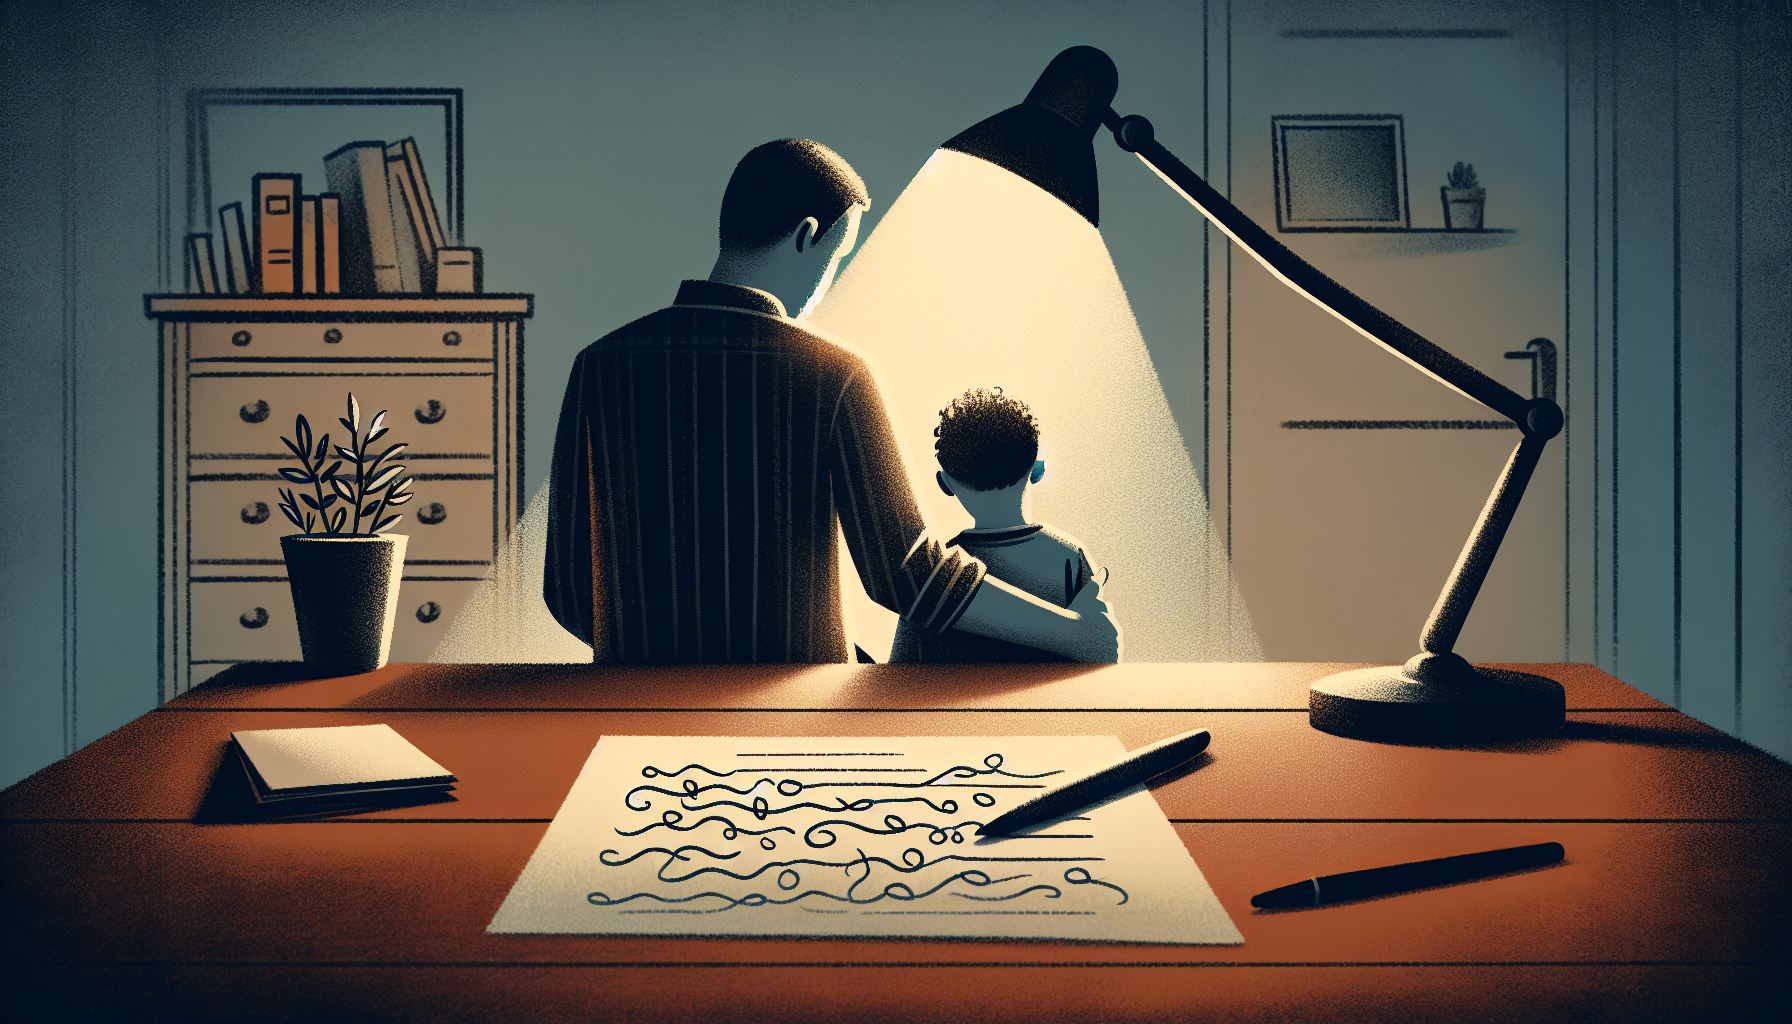 Illustration of a parent and child with a legal document symbolizing temporary child custody orders